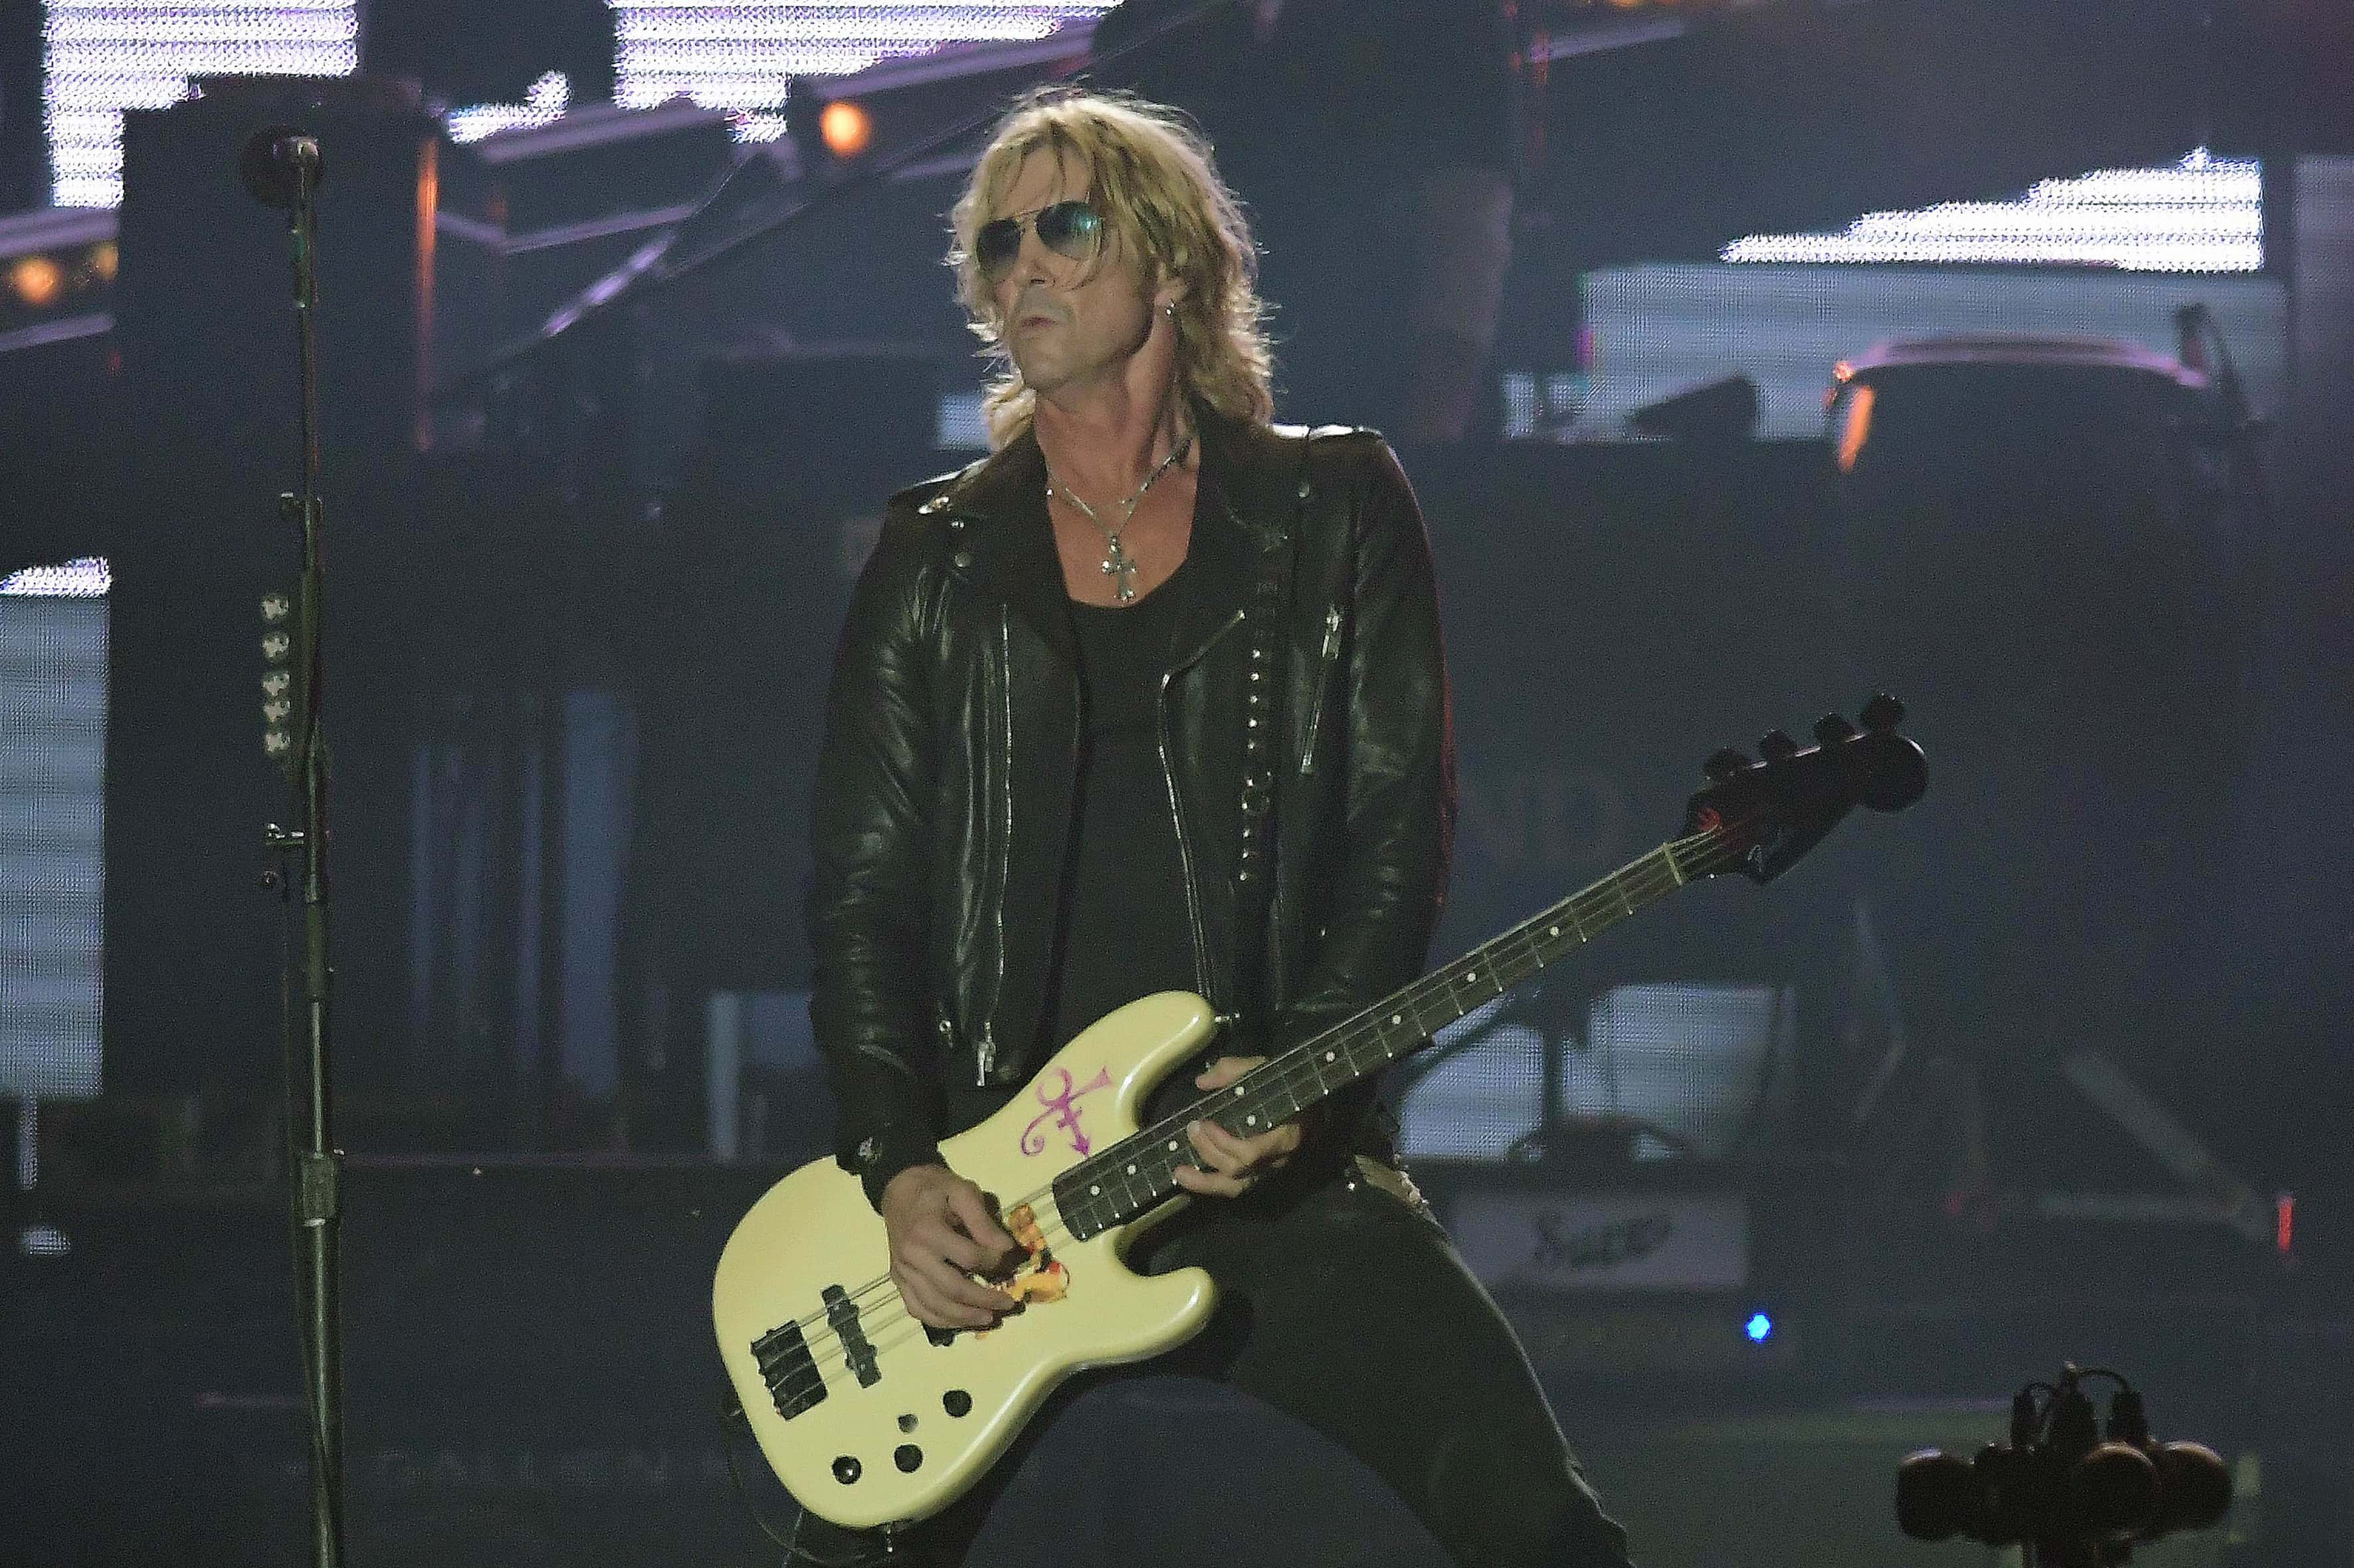 <p>Original bassist Ole Beich lasted barely a month with the band. After their first ever show in March 1985, Beich was fired. He was replaced by Duff McKagan, who we can safely say lasted a bit longer than Beich!</p>